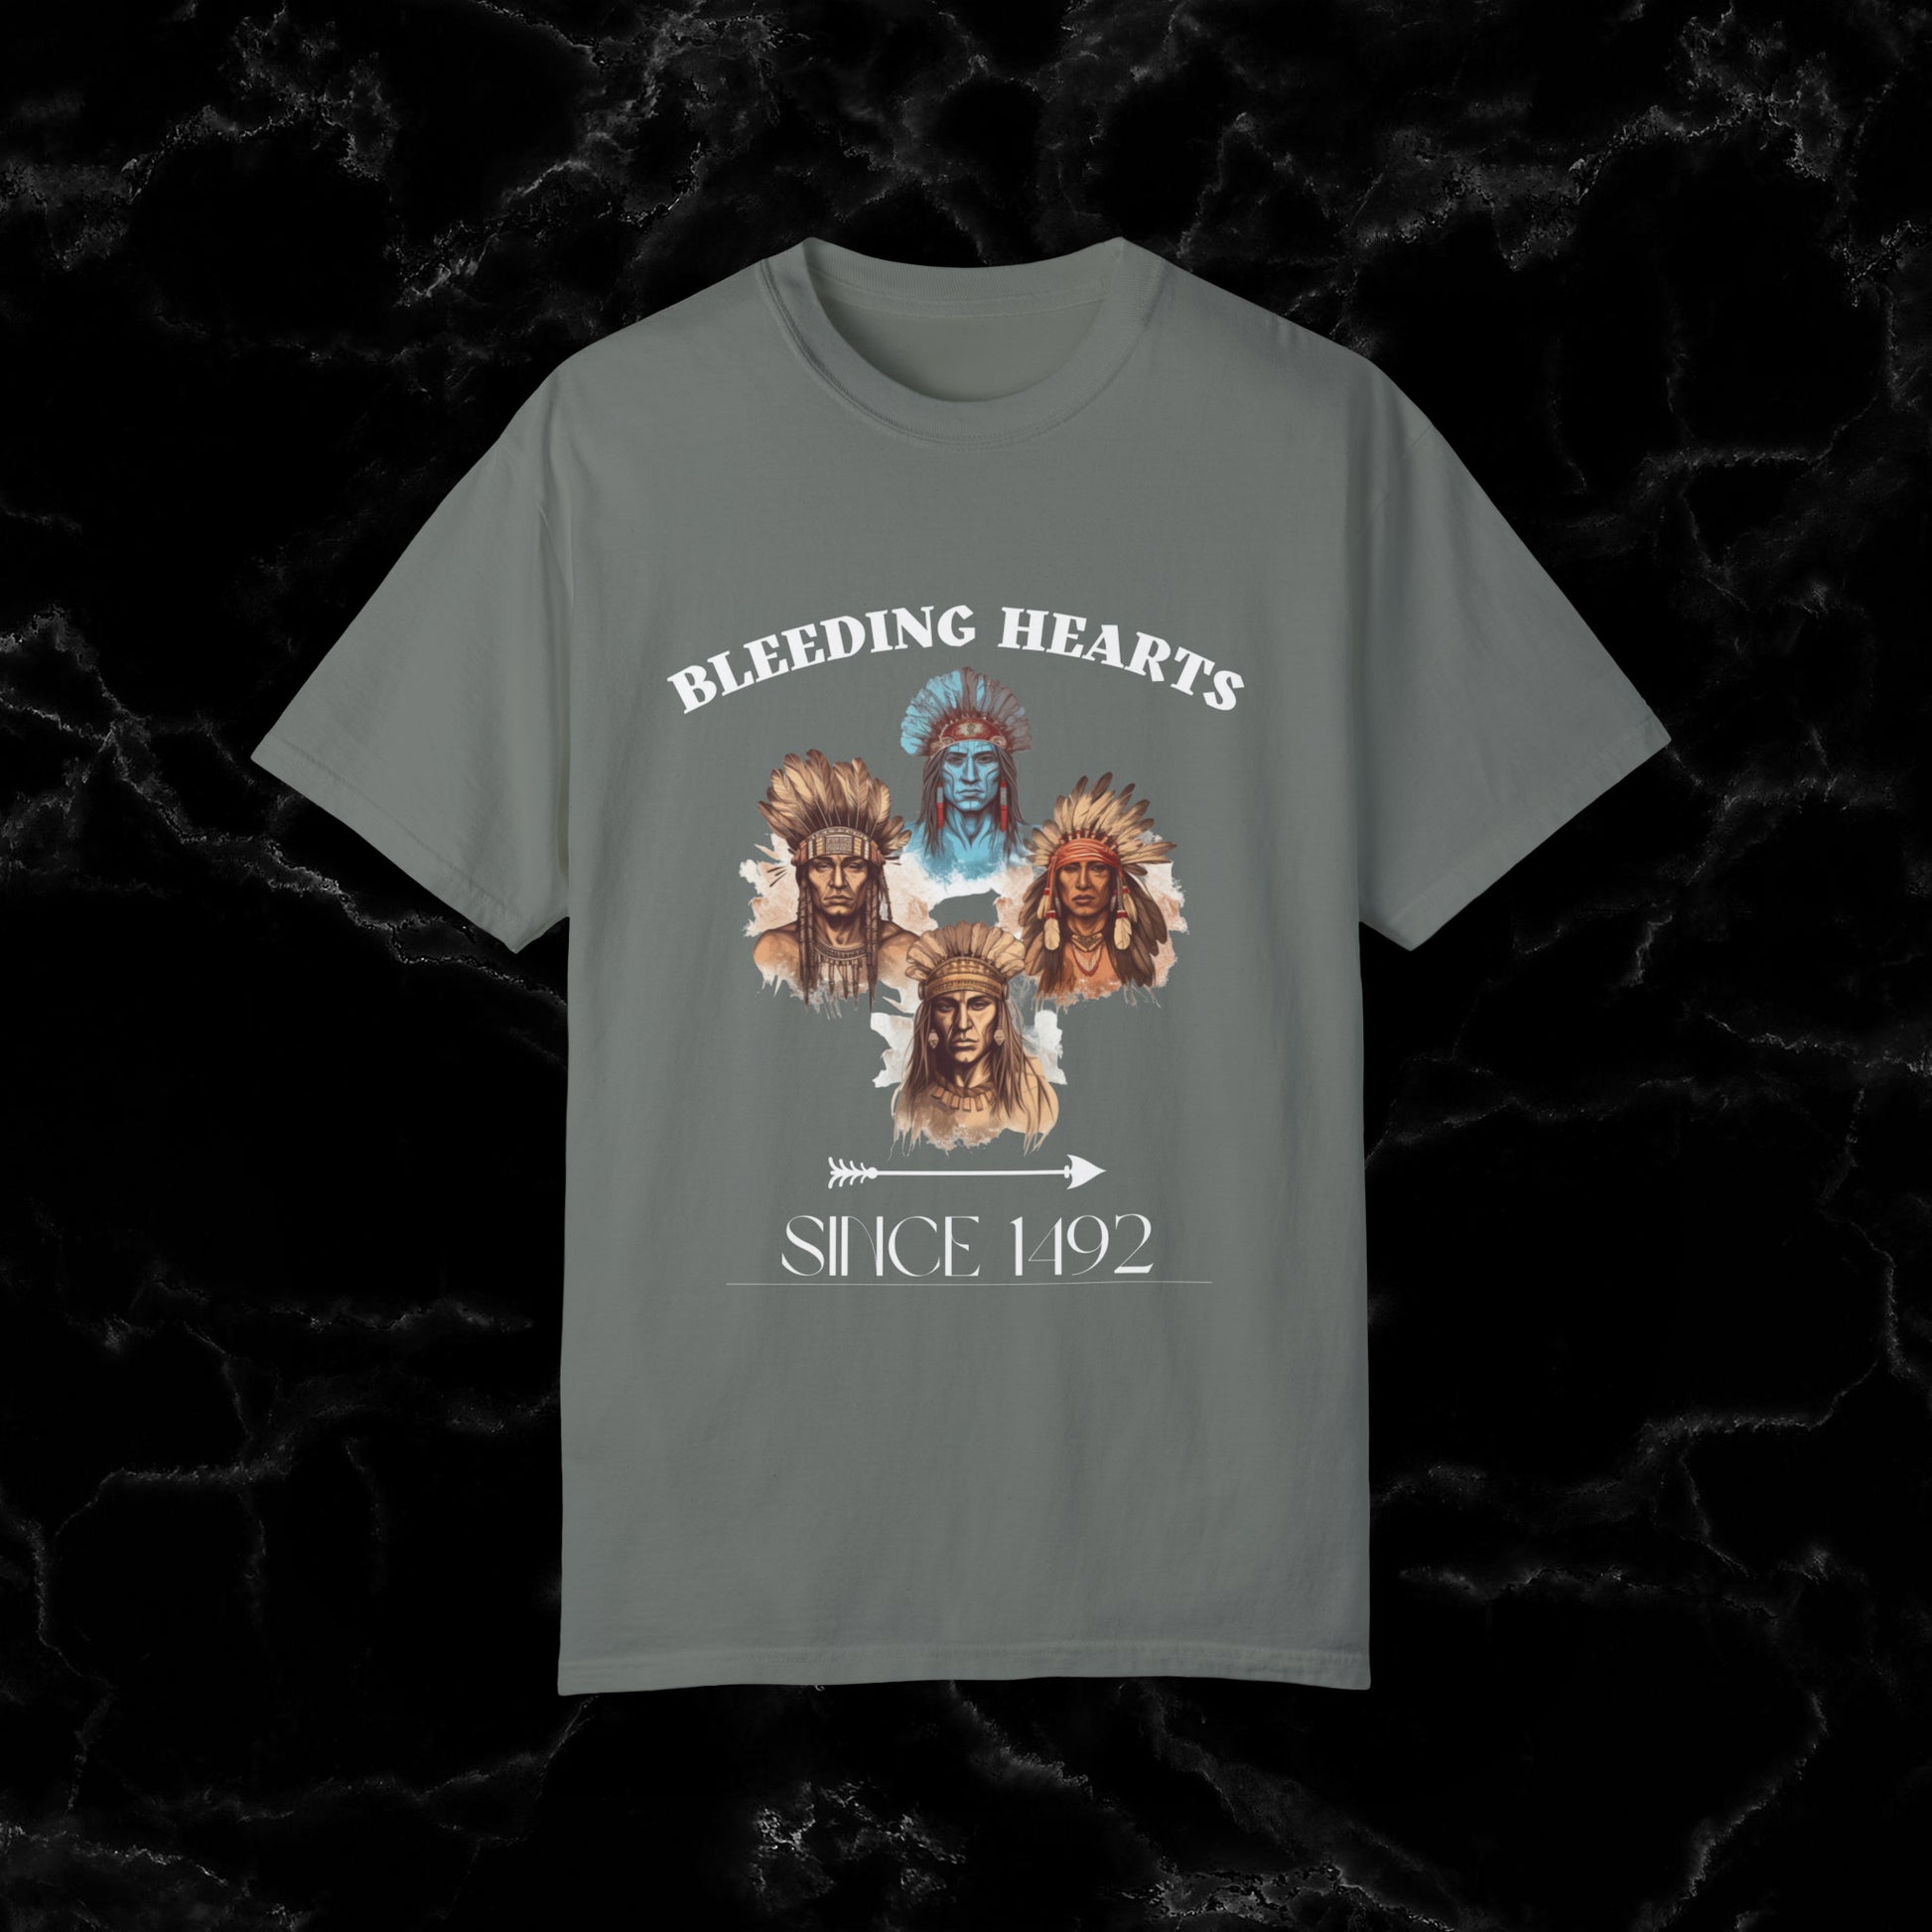 Native American Comfort Colors Shirt - Authentic Tribal Design, Nature-Inspired Apparel, 'Bleeding Hearts since 1492 T-Shirt Grey S 